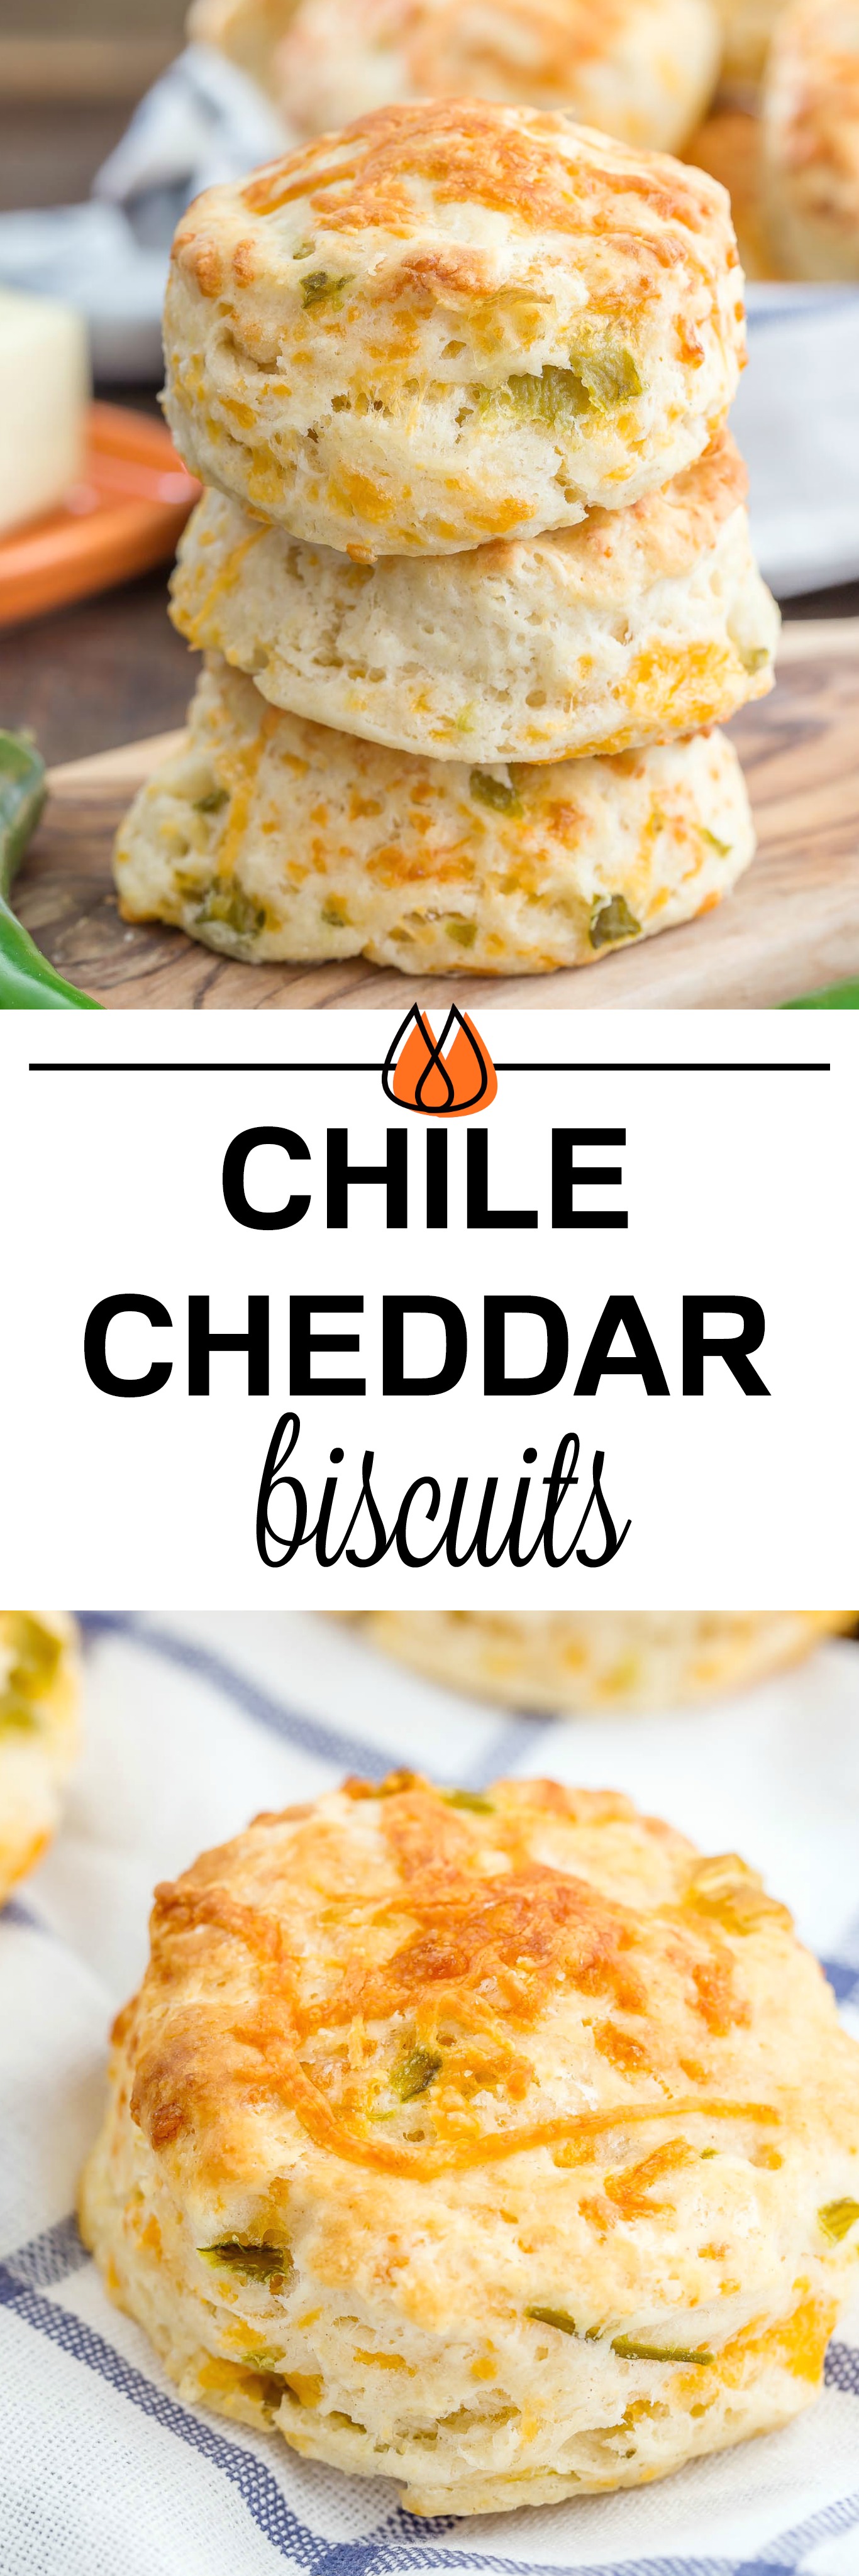 These Green Chile Cheddar Biscuits are perfect with a bowl of your favorite soup or chili.  They are light, fluffy and kicked up a notch with green chilies.  Eating them by themselves is a good snack idea too! #biscuits #cheddar #buttermilk #greenchile